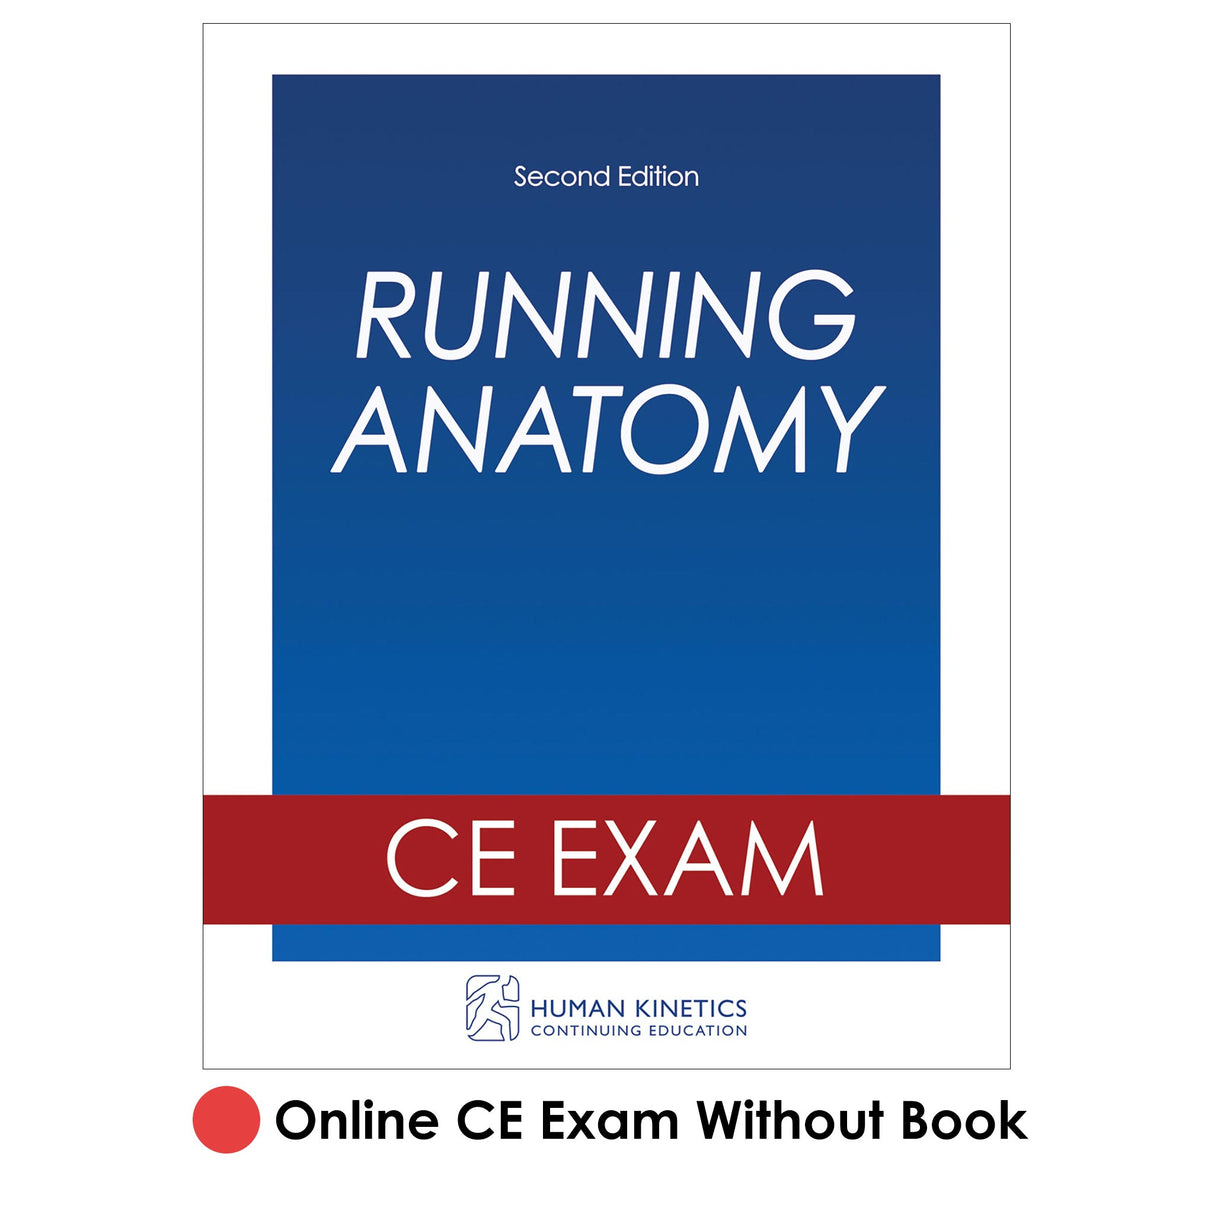 Running Anatomy 2nd Edition Online CE Exam Without Book